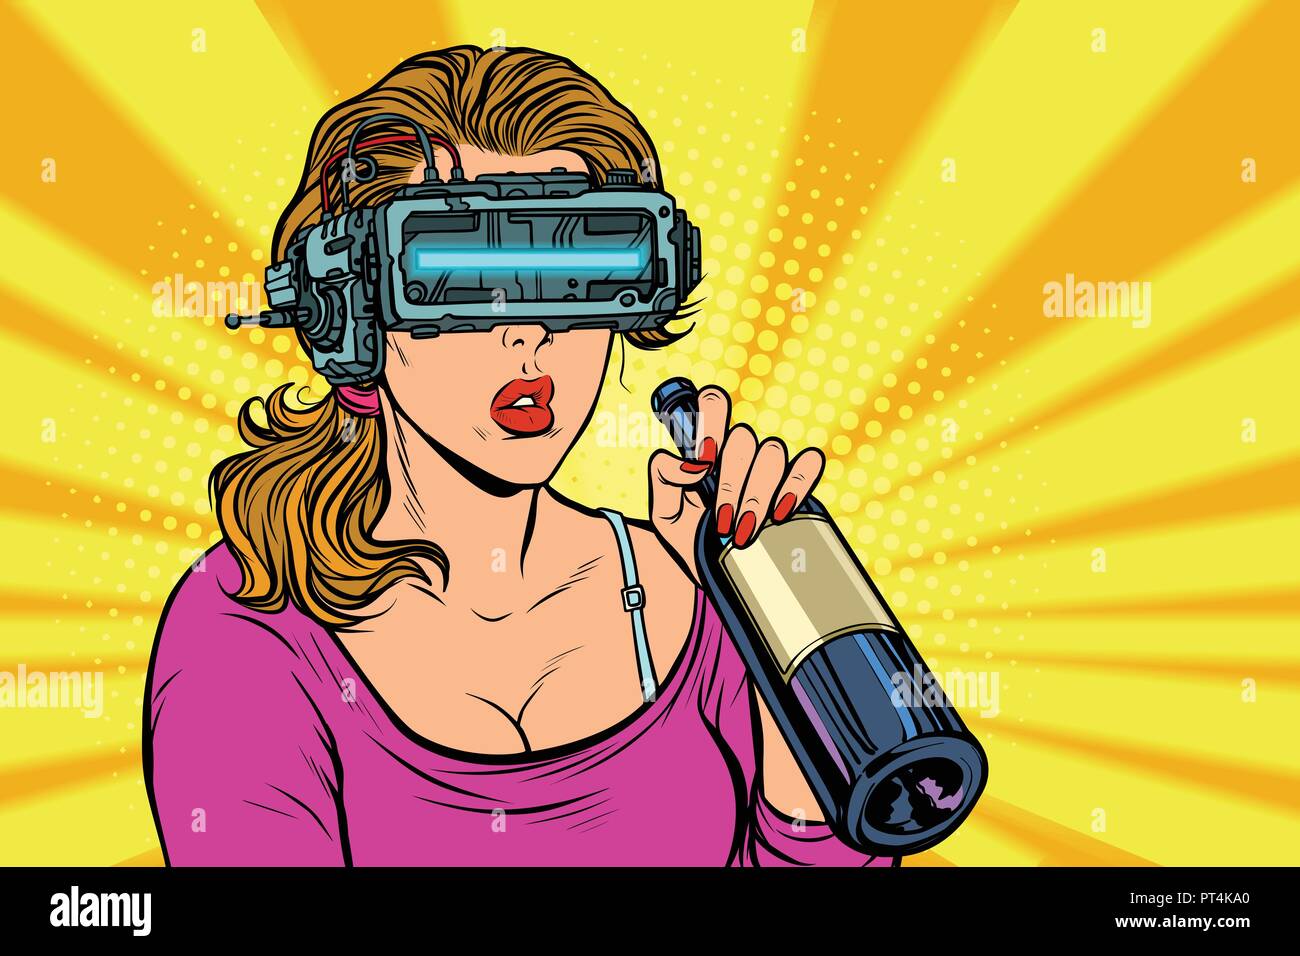 VR glasses. Woman drinking wine from a bottle. Loneliness and sadness. Pop art retro vector illustration vintage kitsch Stock Vector